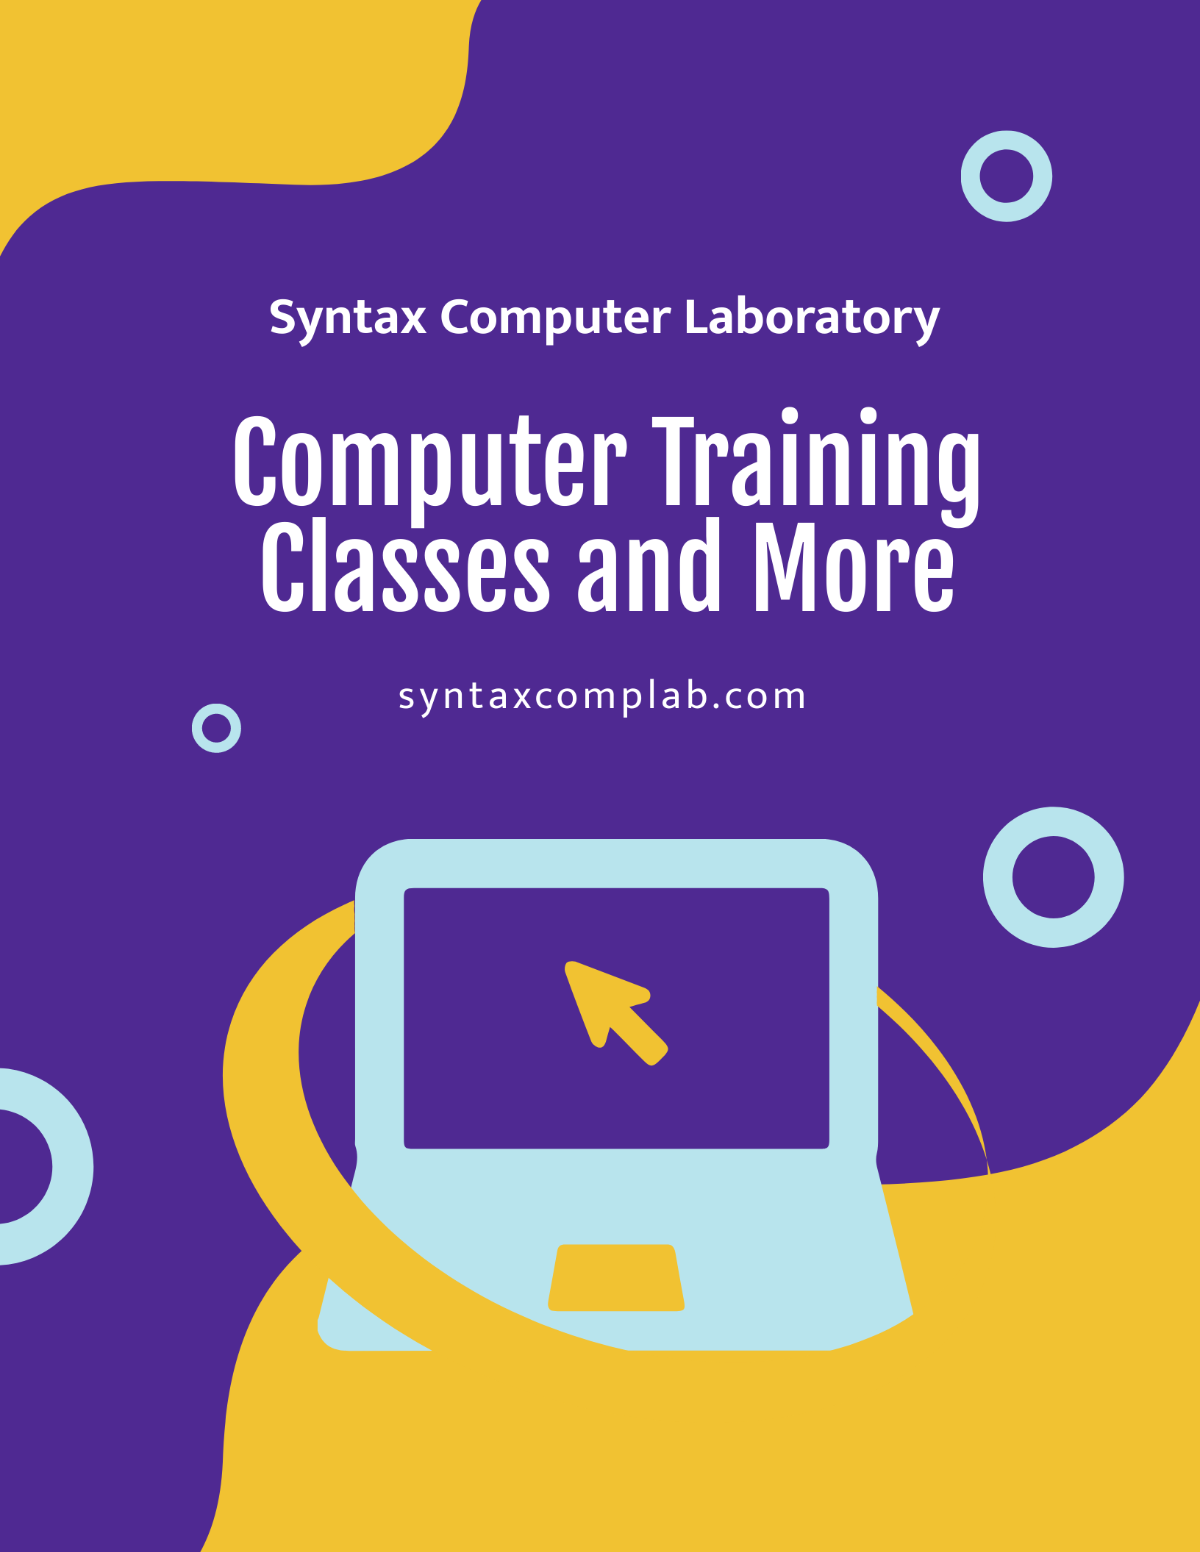 Computer Training Flyer Template